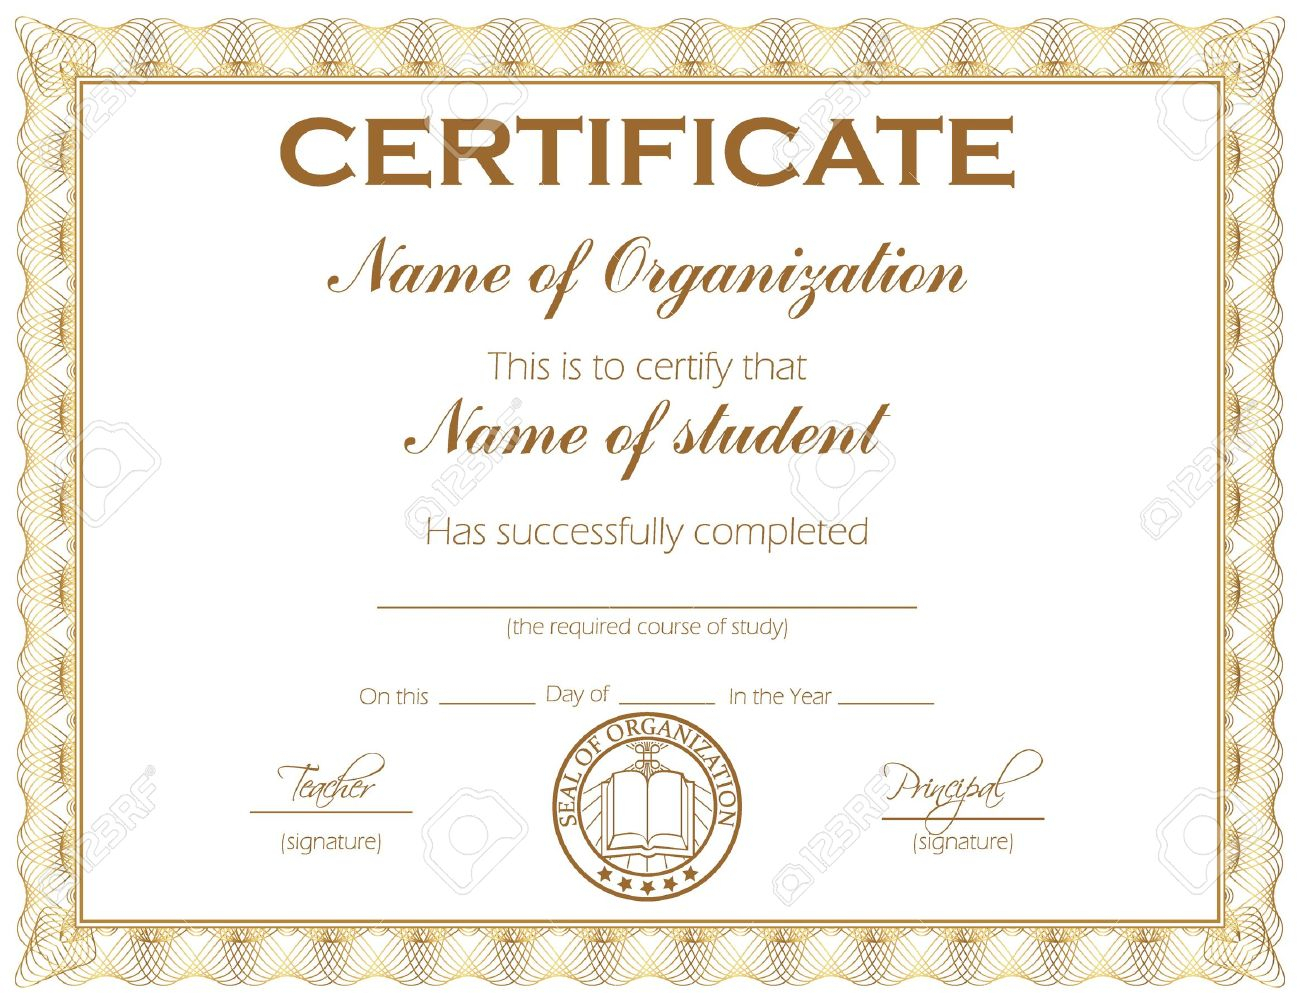 General Purpose Certificate Or Award With Sample Text That Can.. Throughout Template For Certificate Of Award